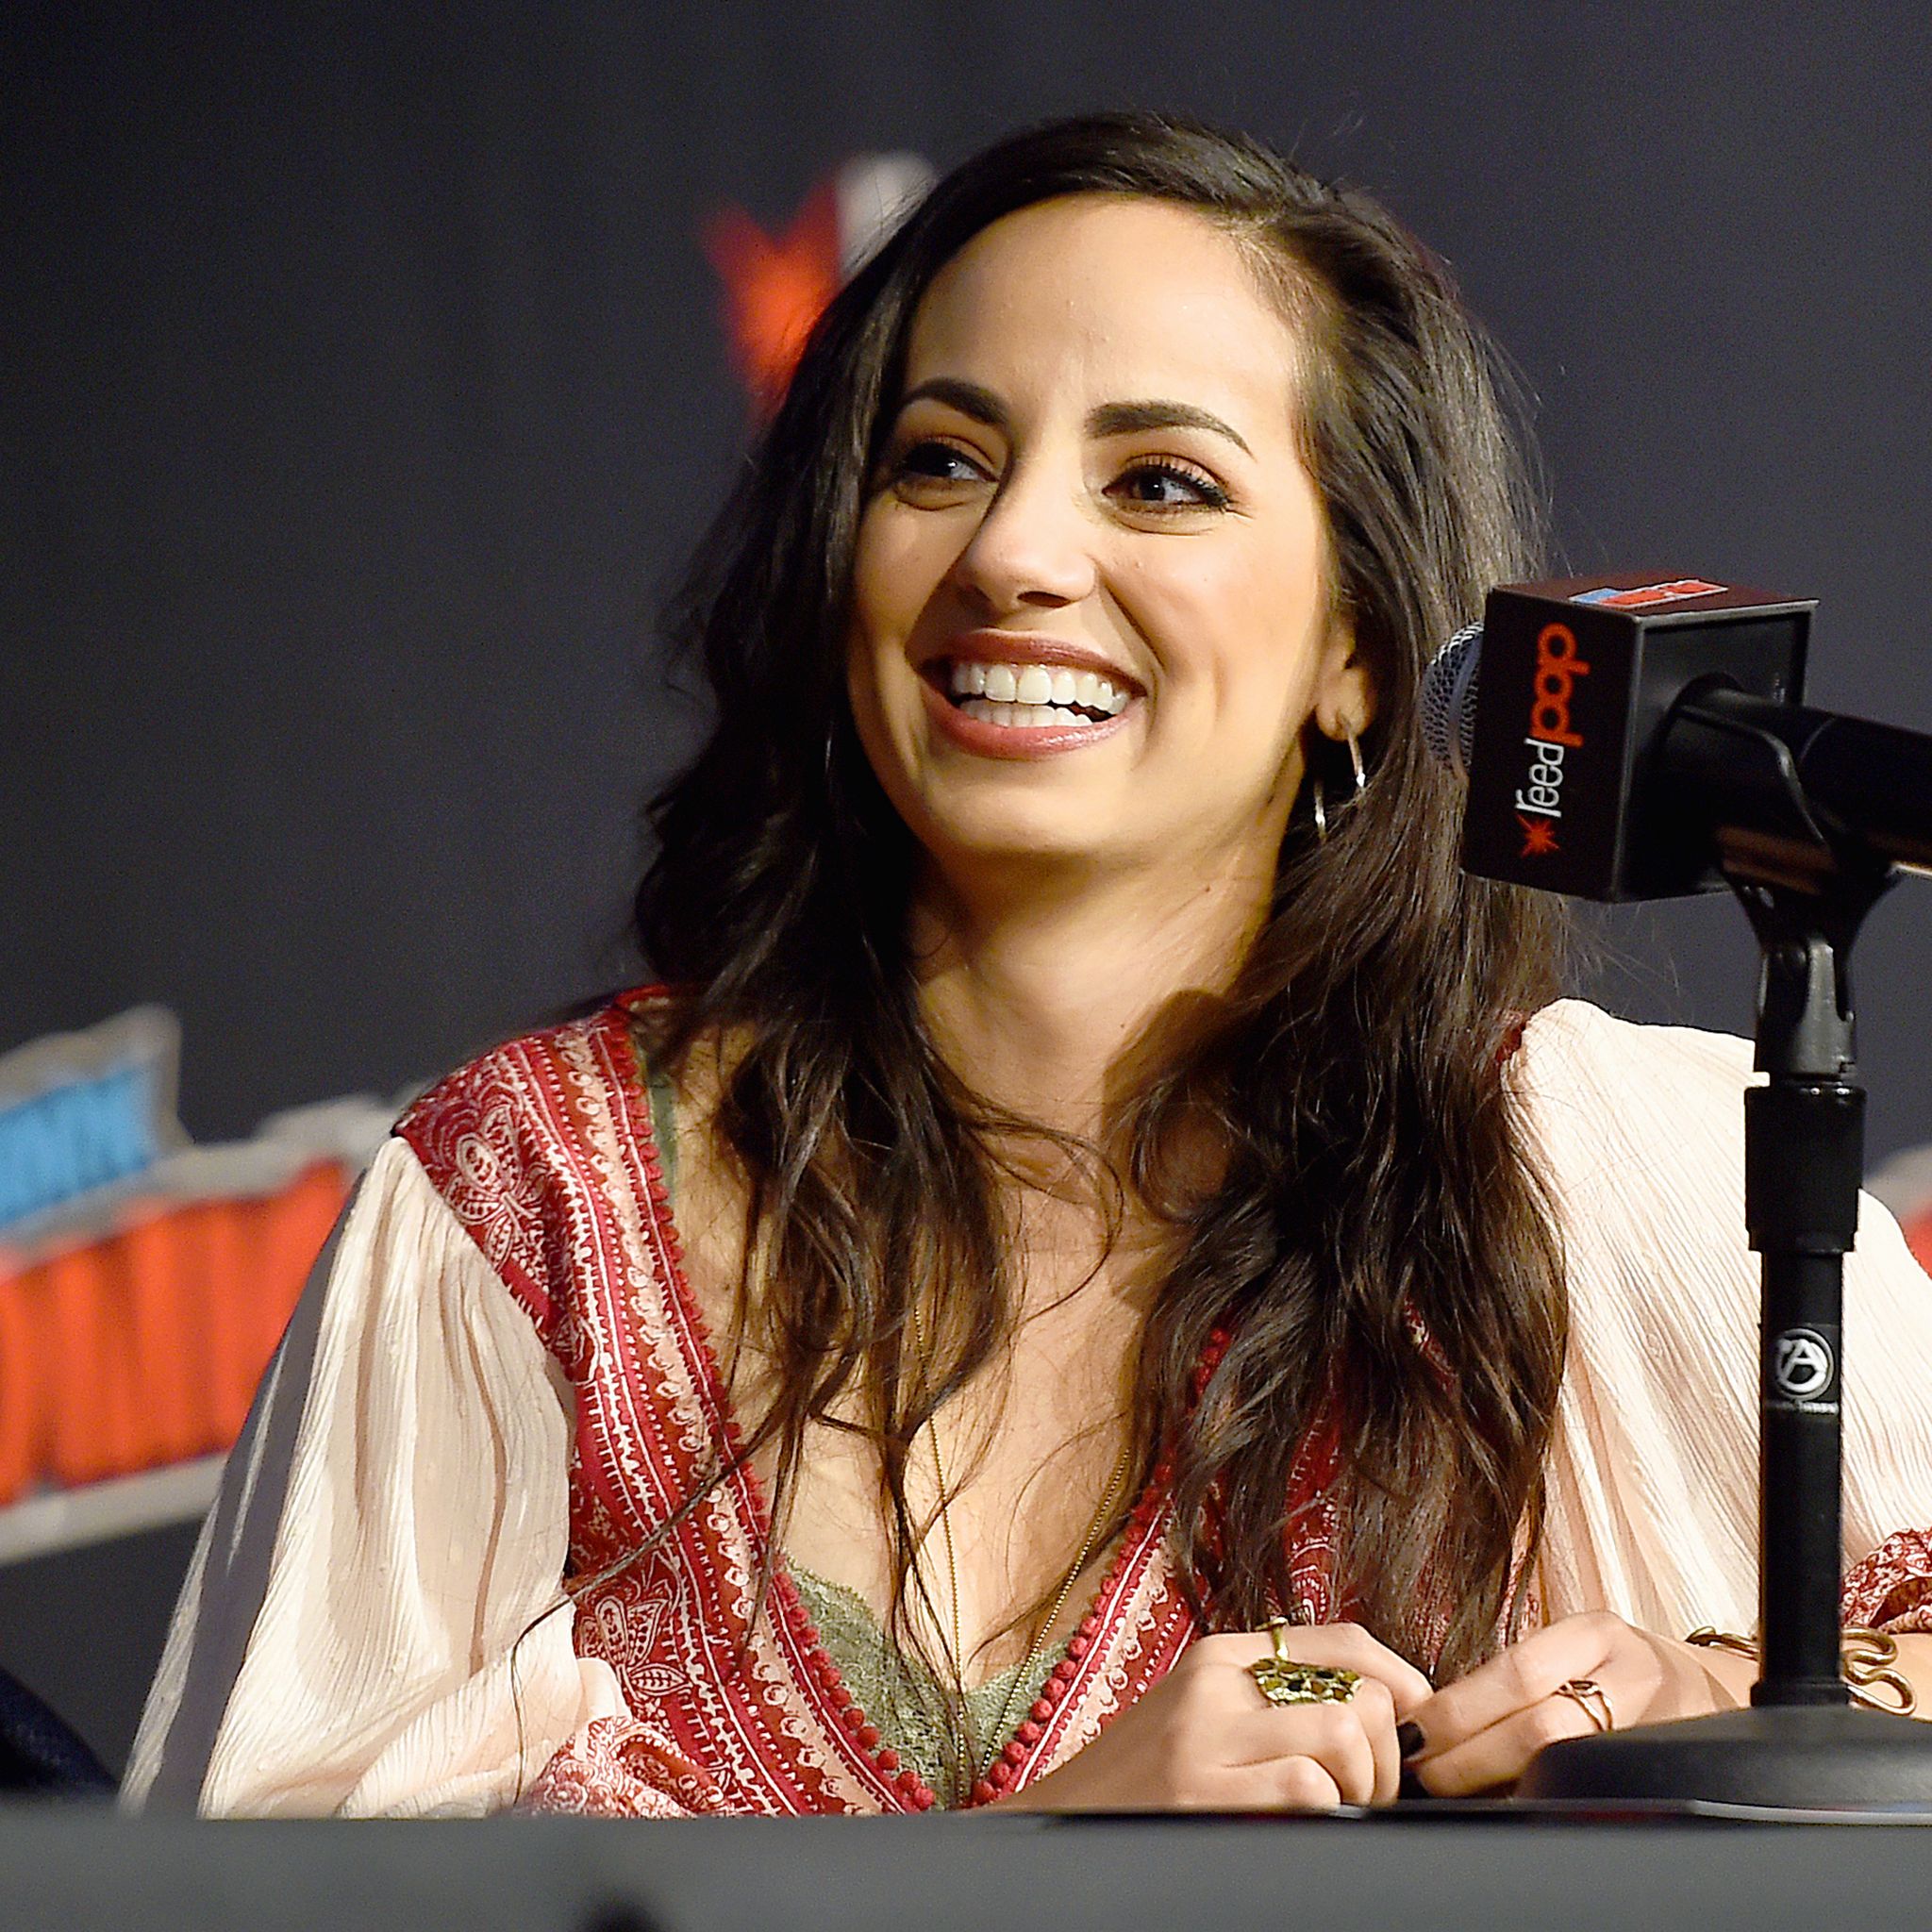 sandra saad, who plays ms marvel in marvel's avengers video game, speaks at new york comic con 2019